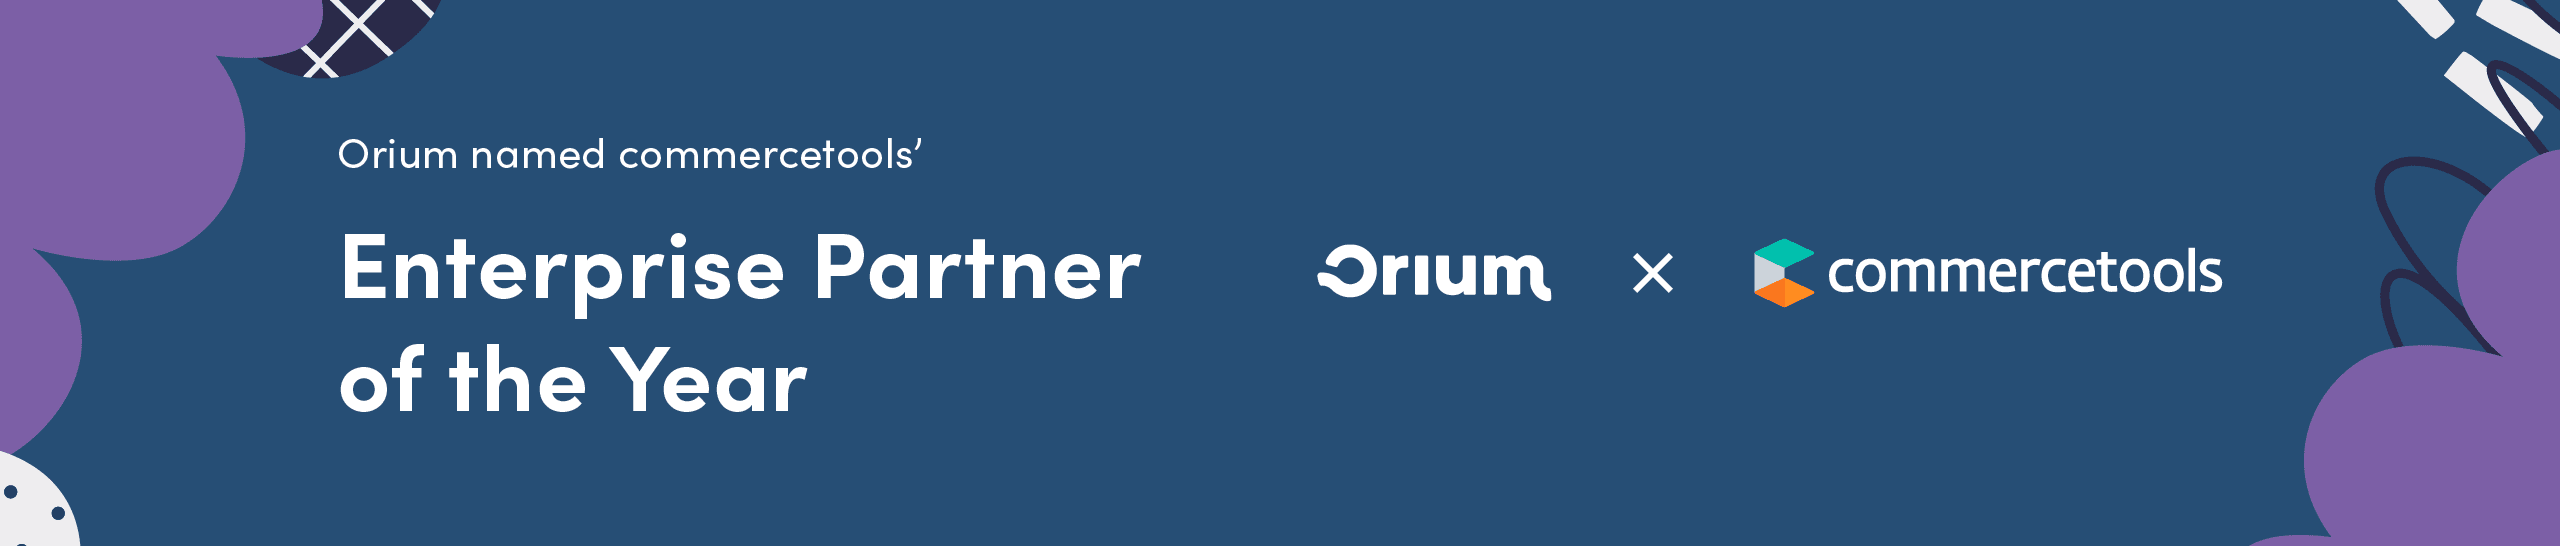 Logos of Orium and commercetools as Orium is selected as commercetools' Enterprise Partner of the Year.